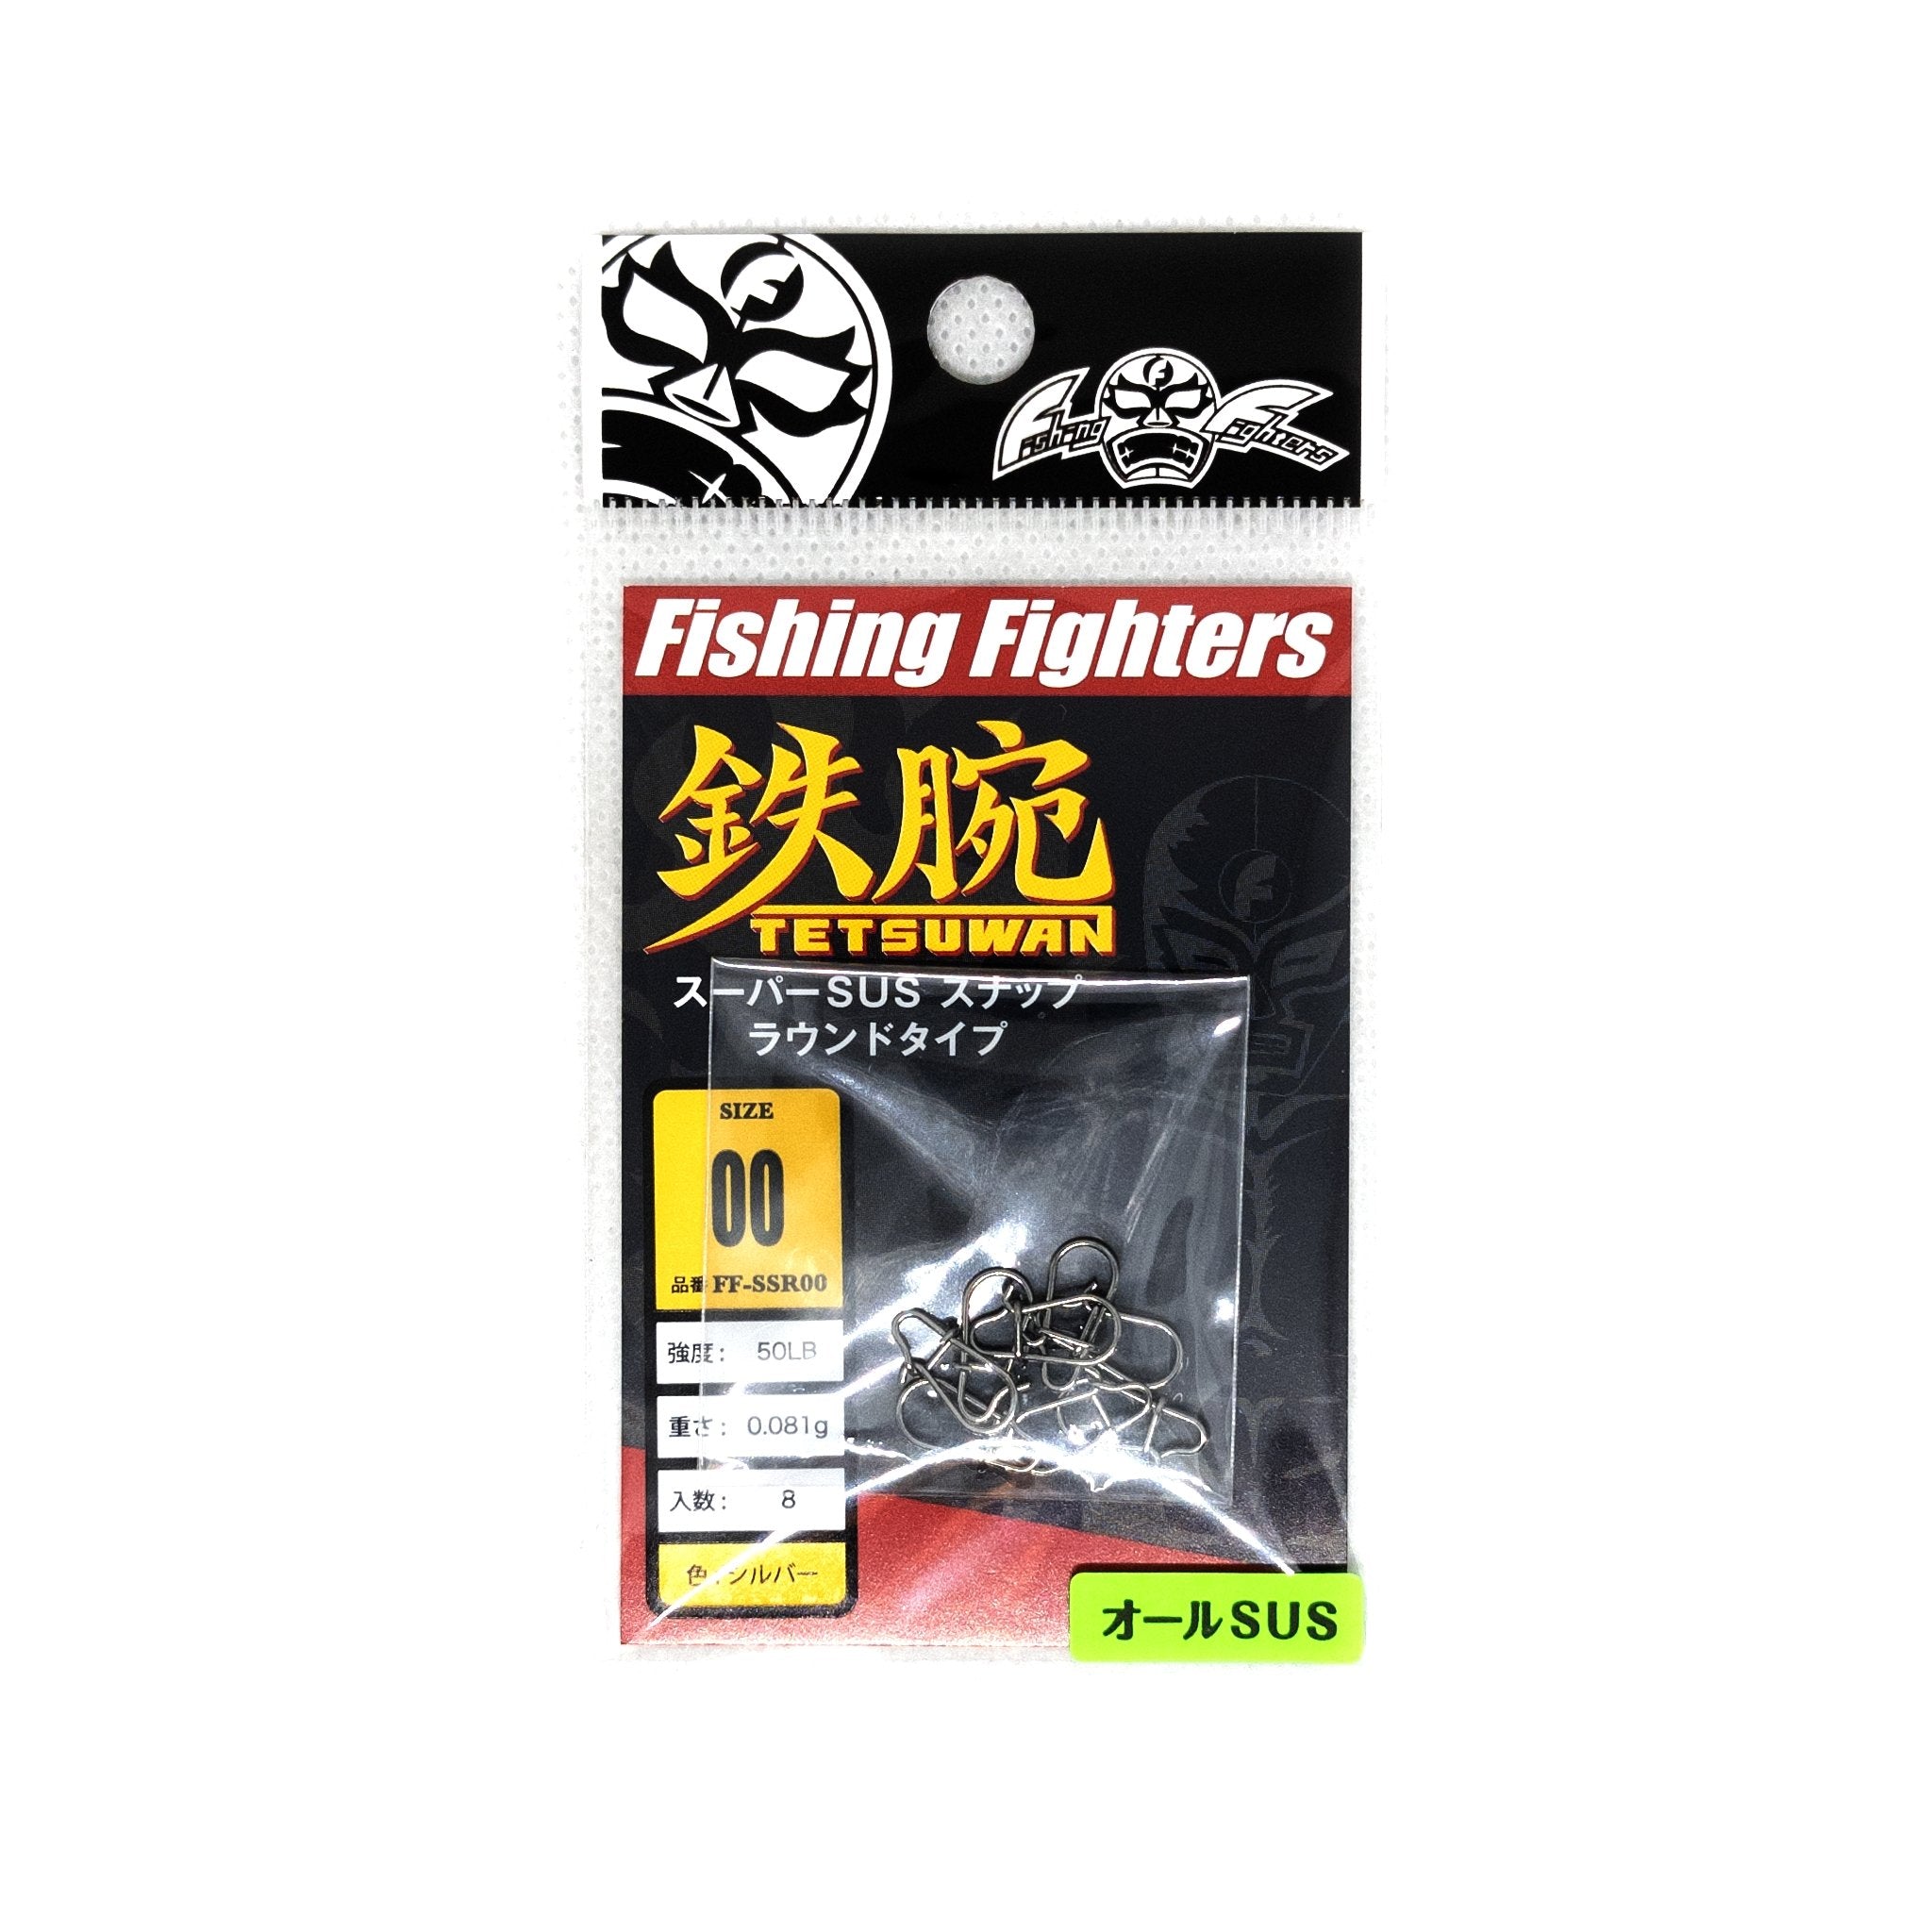 Tetsuwan Fishing Fighters SUS Round Snap Size 00 - The Borrowed Lure